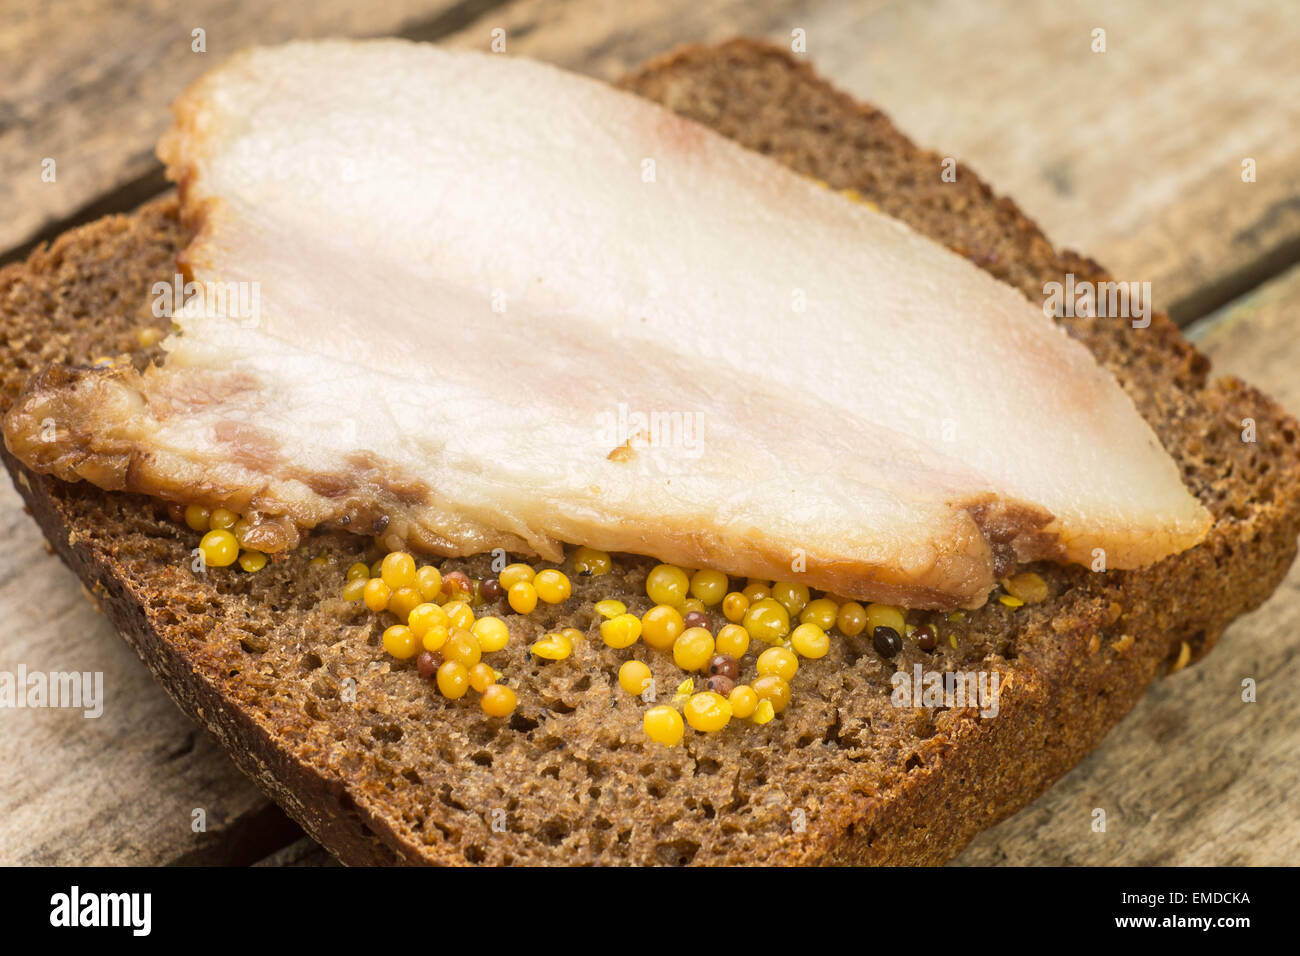 Close up image bacon sanwich with mustard on wooden table. Corned bacon on the bread Stock Photo